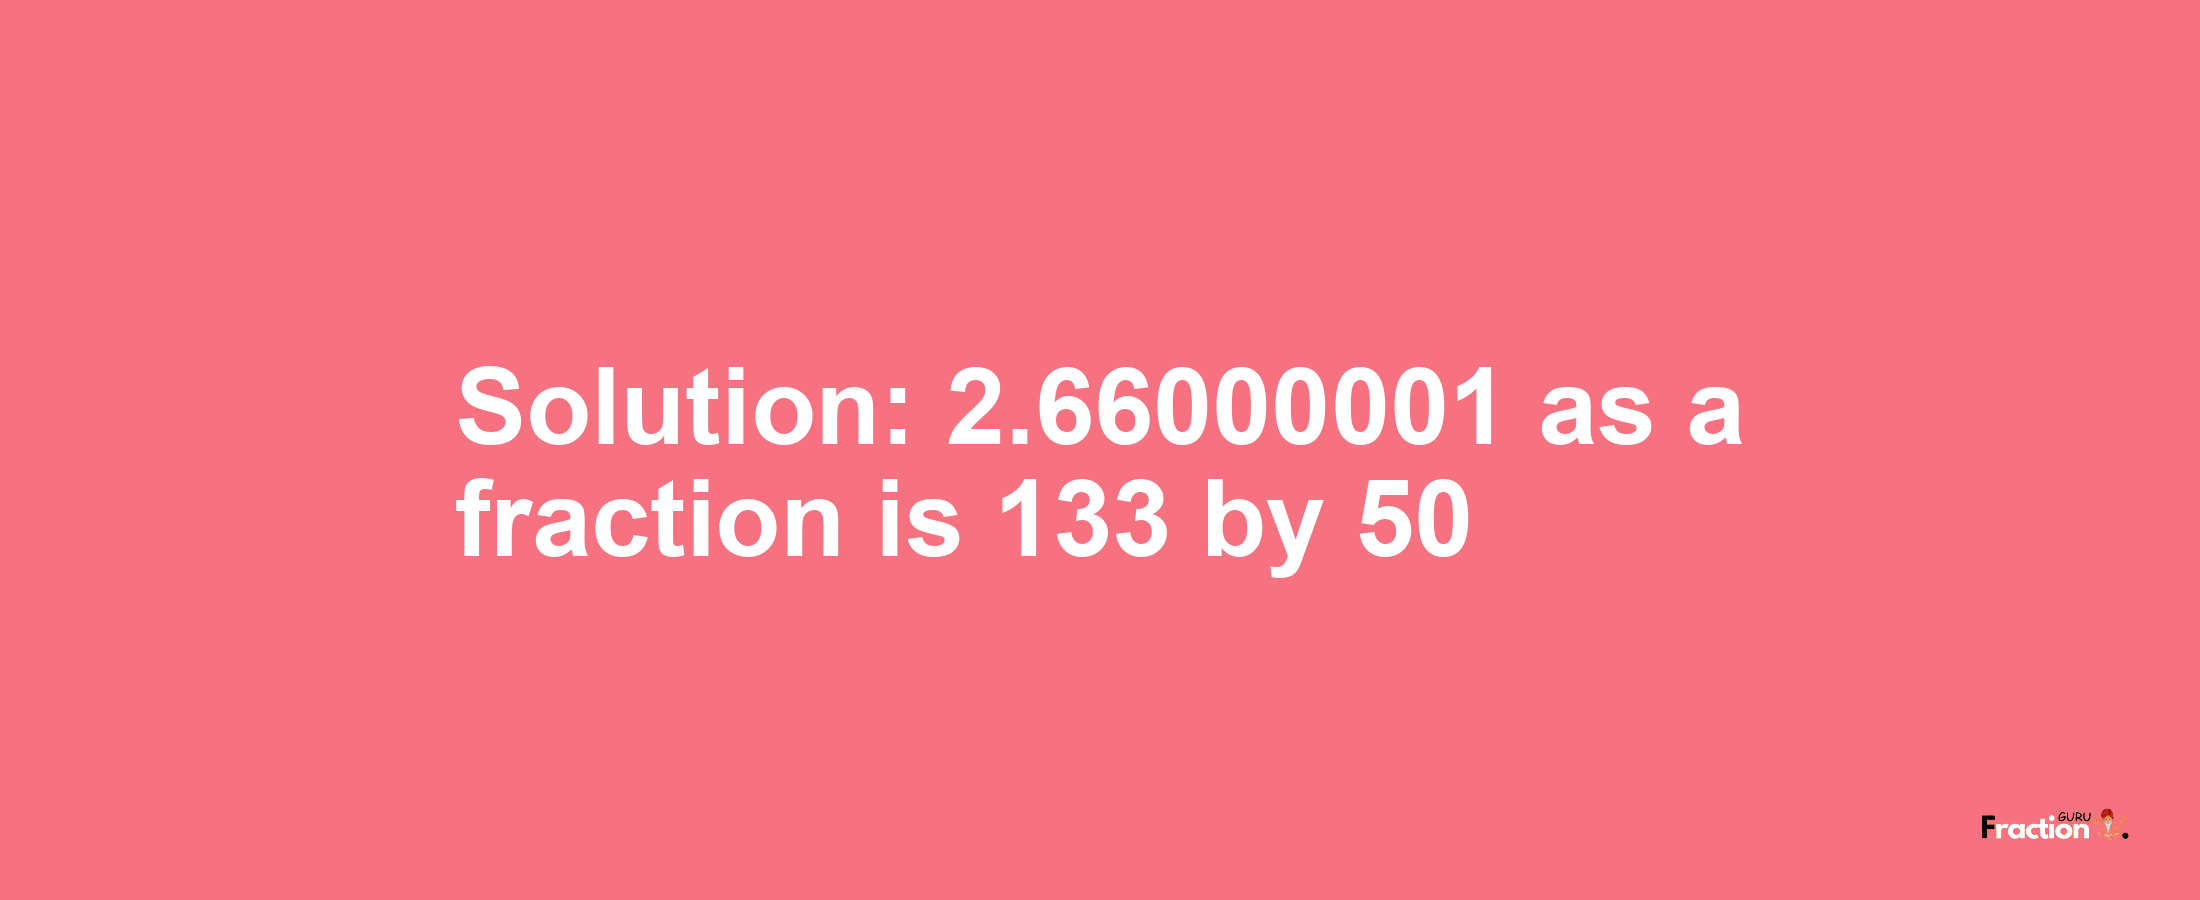 Solution:2.66000001 as a fraction is 133/50